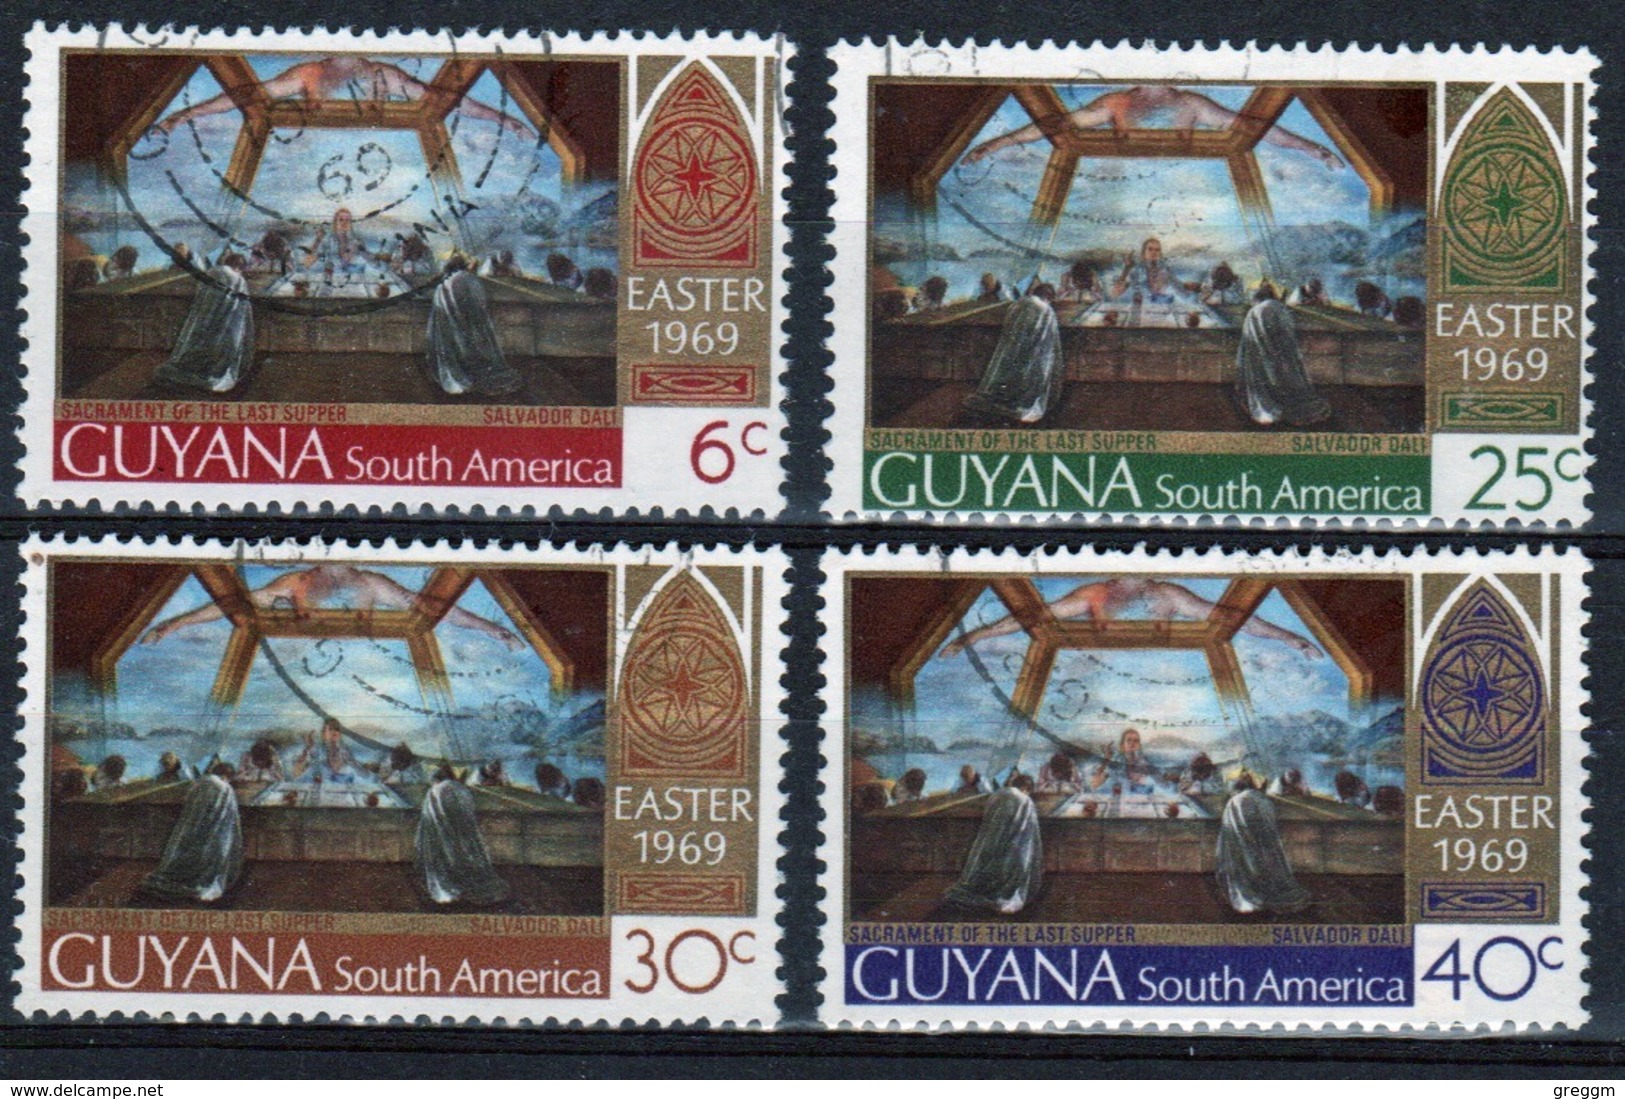 Guyana 1969 Set Of Stamps To Celebrate Easter. - Guyana (1966-...)